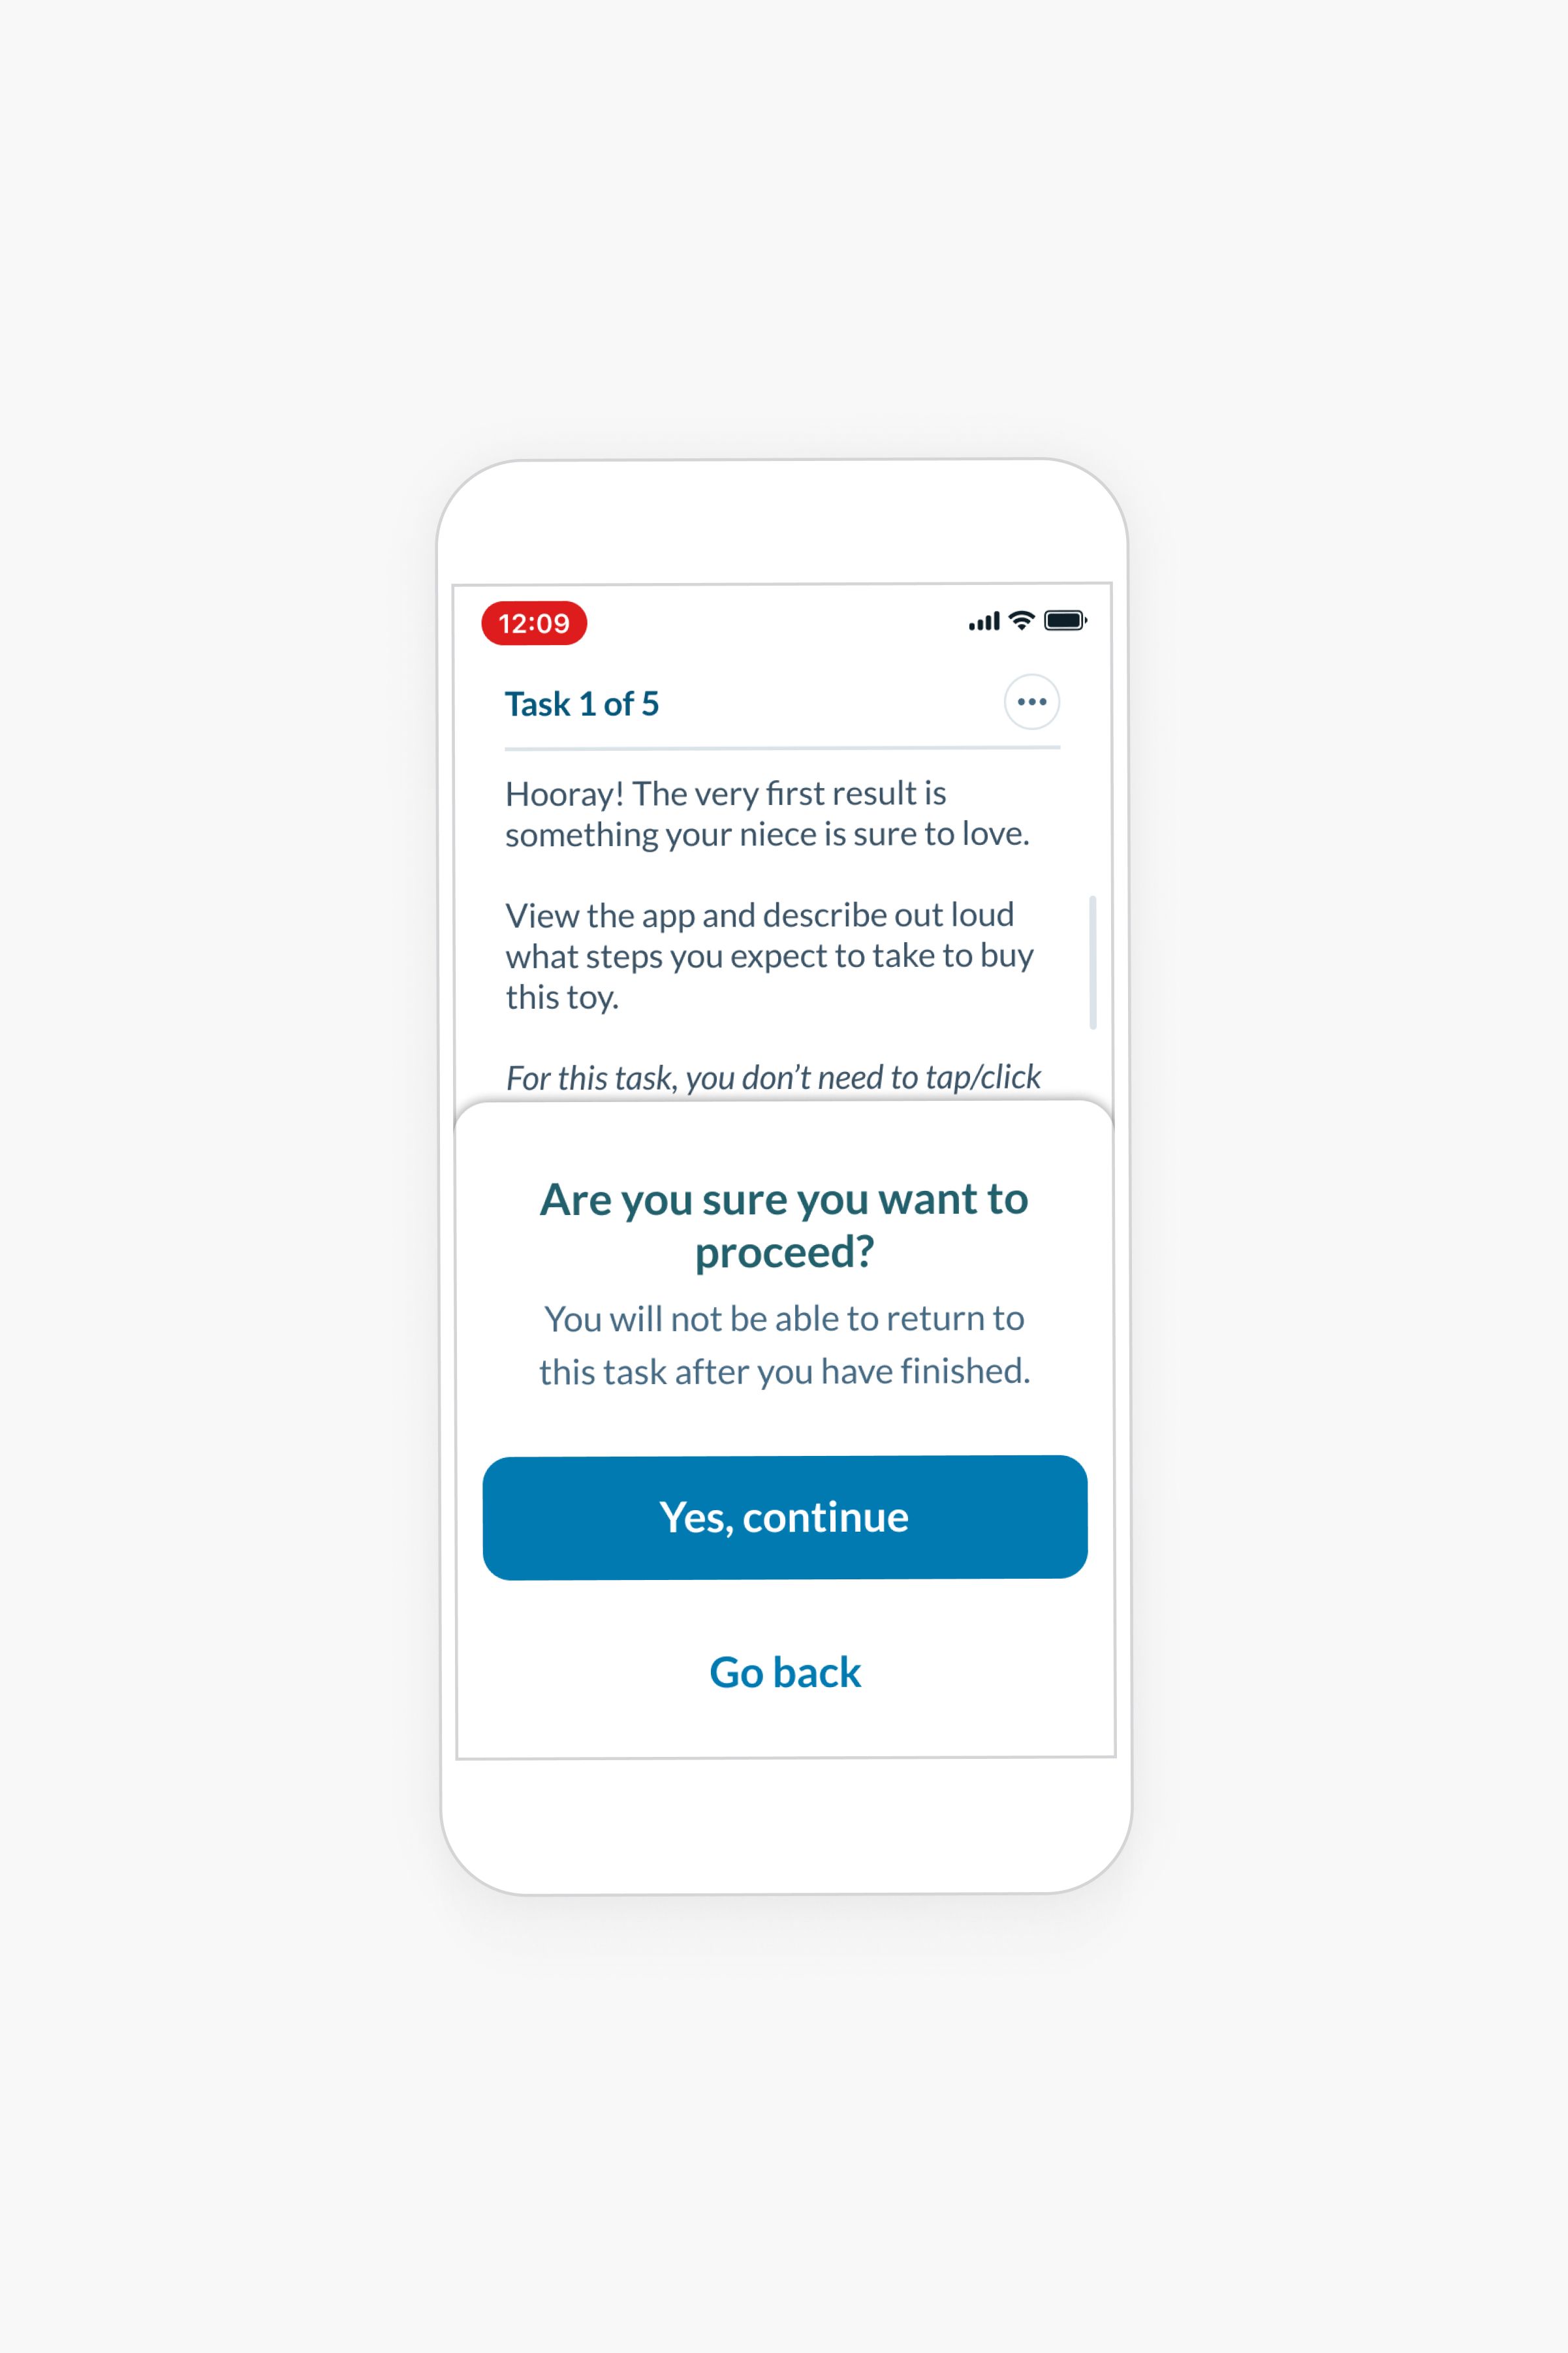 Lookback's Unmoderated Mobile Tasks user research product